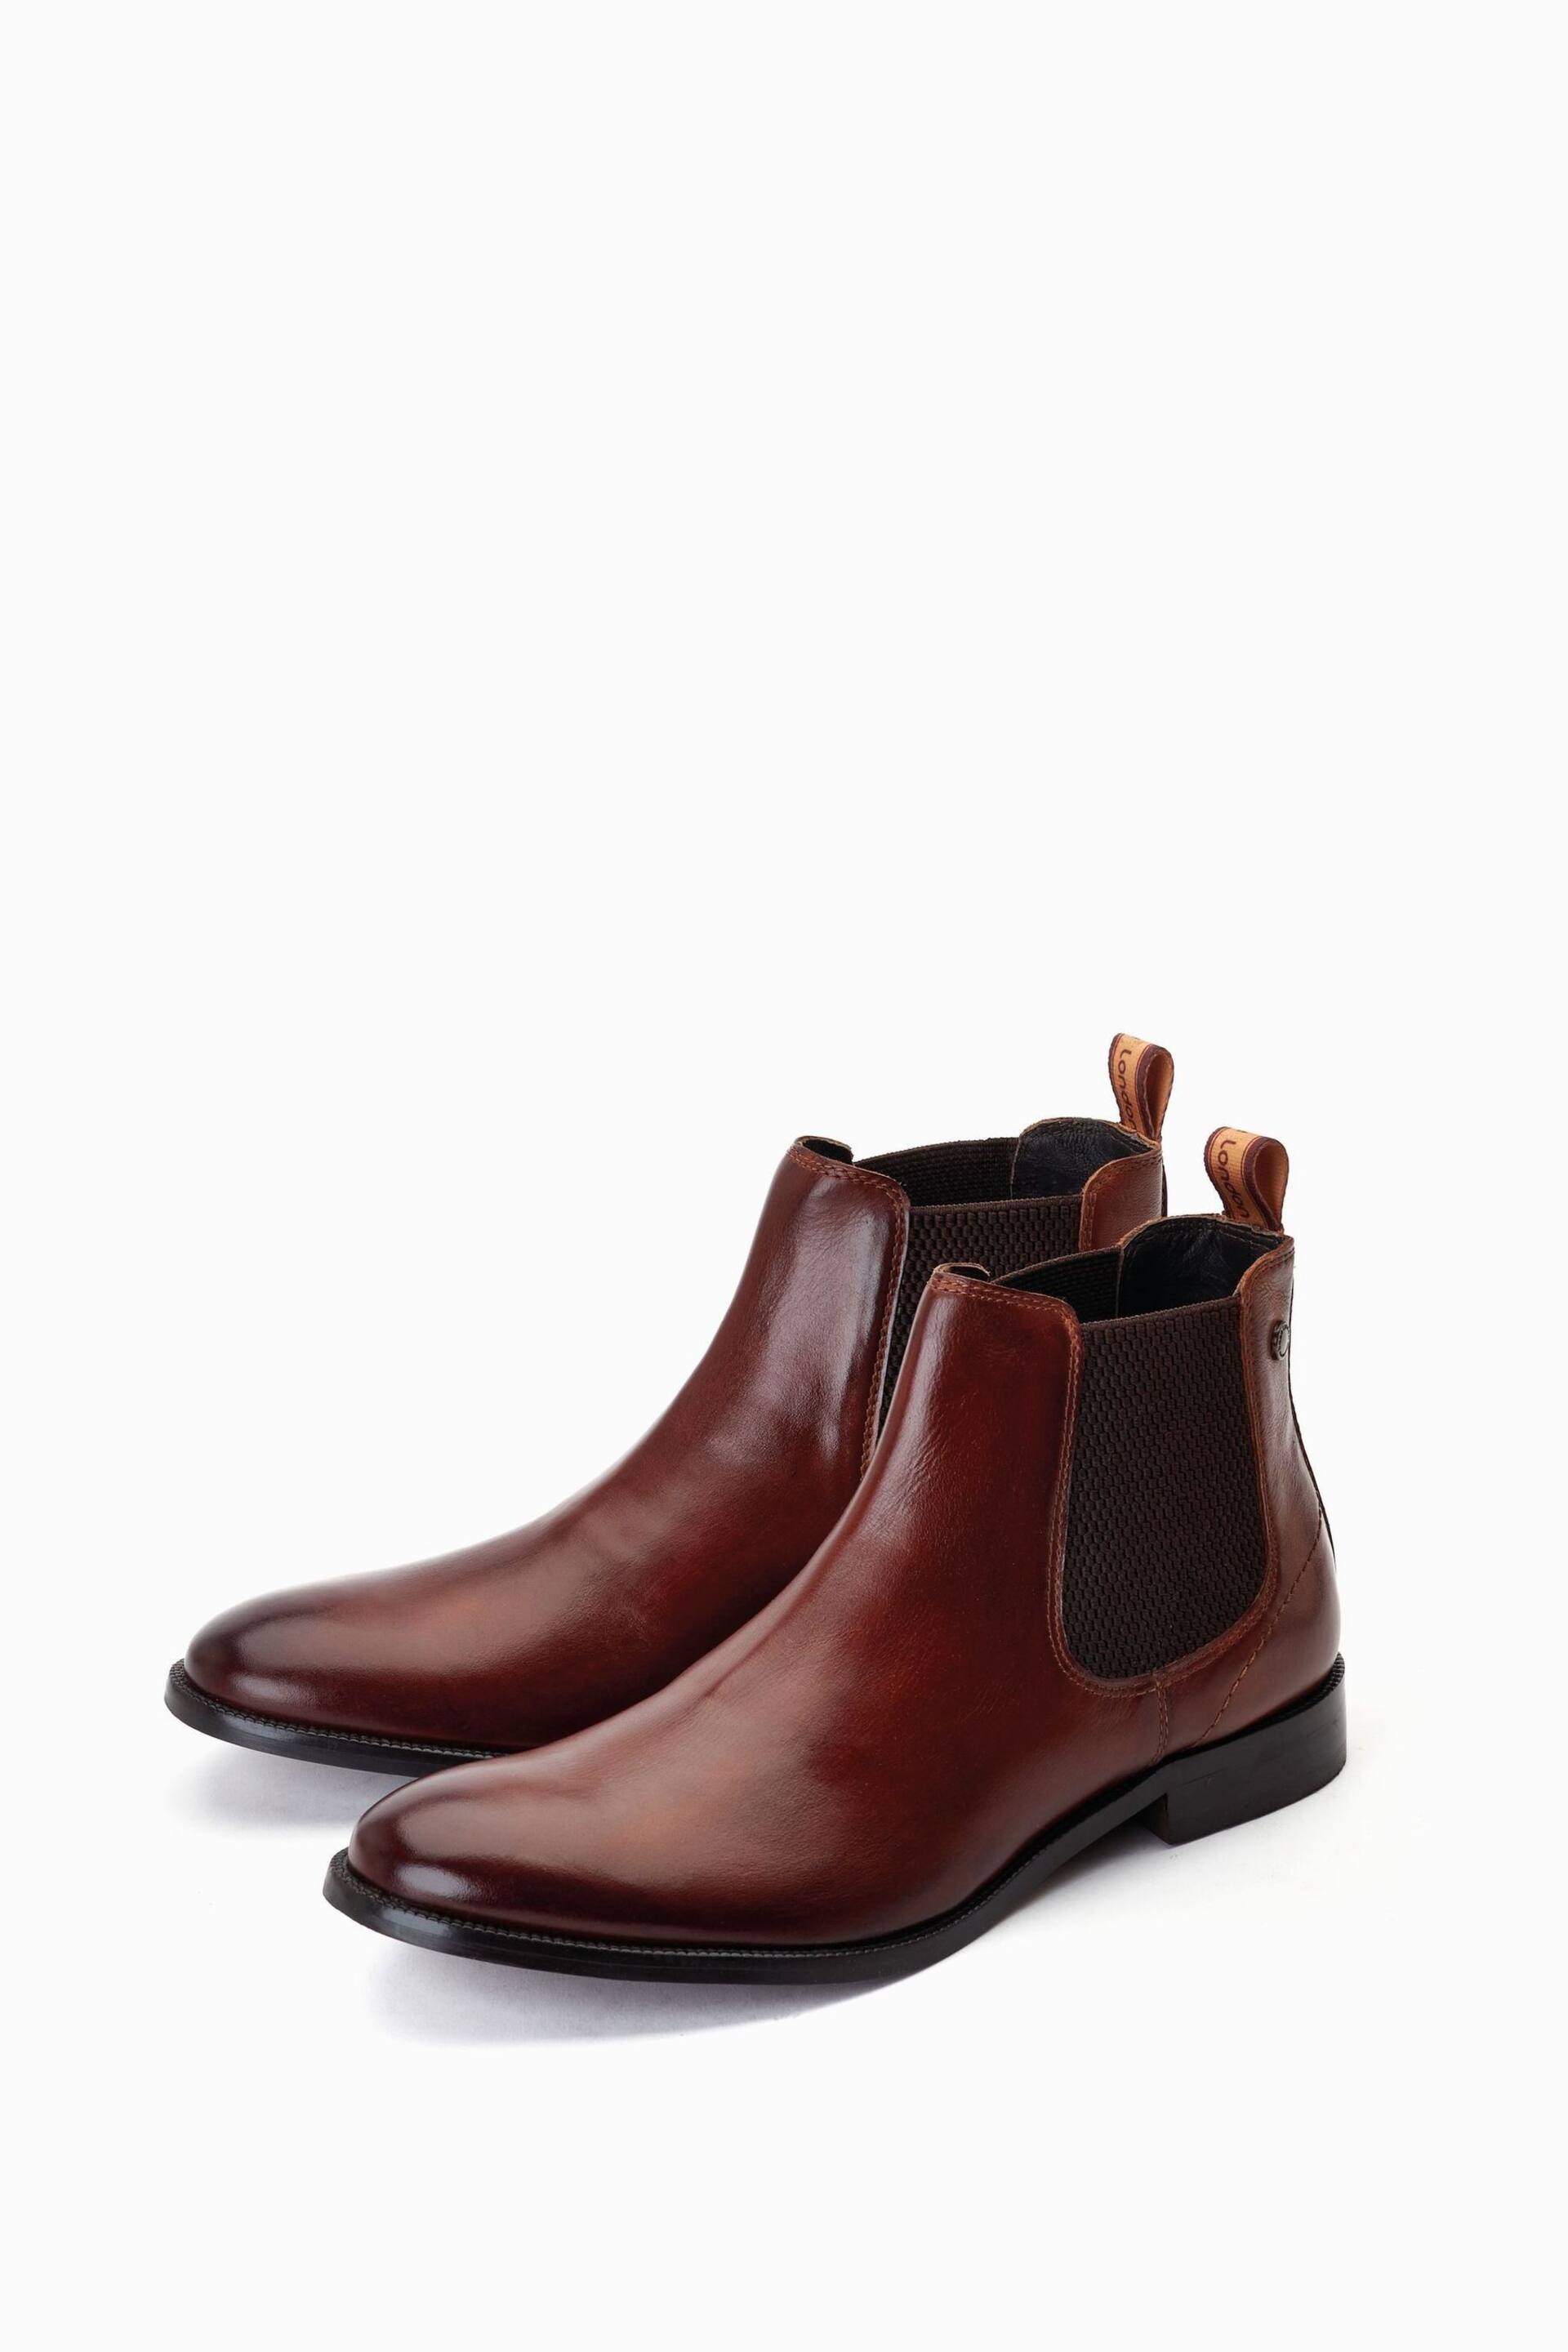 Base London Carson Pull On Chelsea Boots - Image 3 of 6